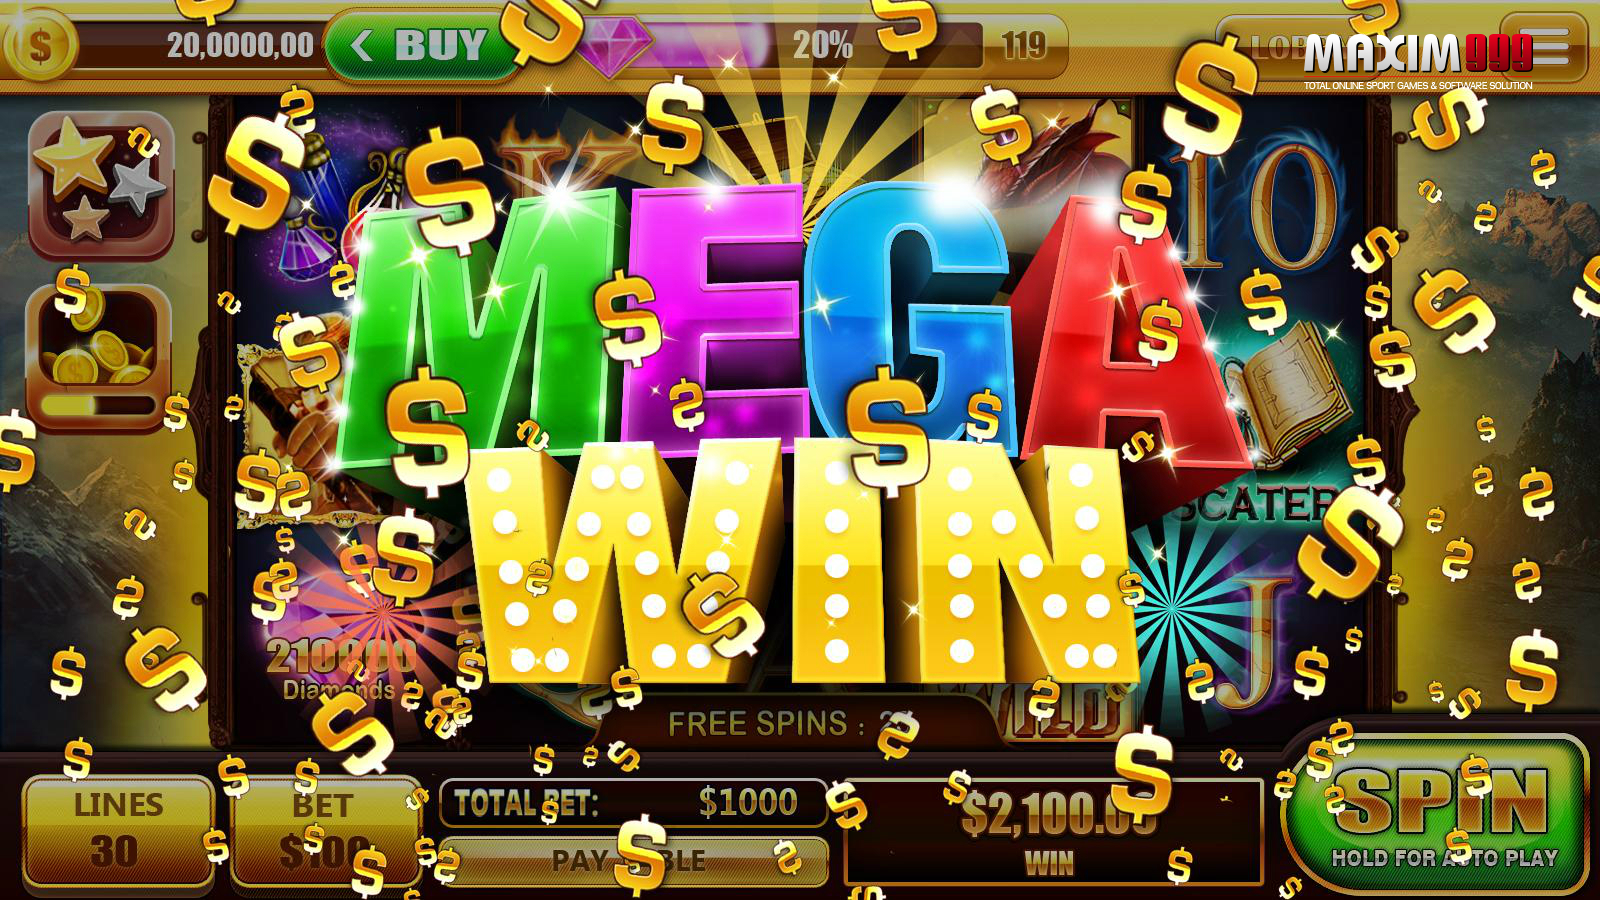 Slot game online malaysia